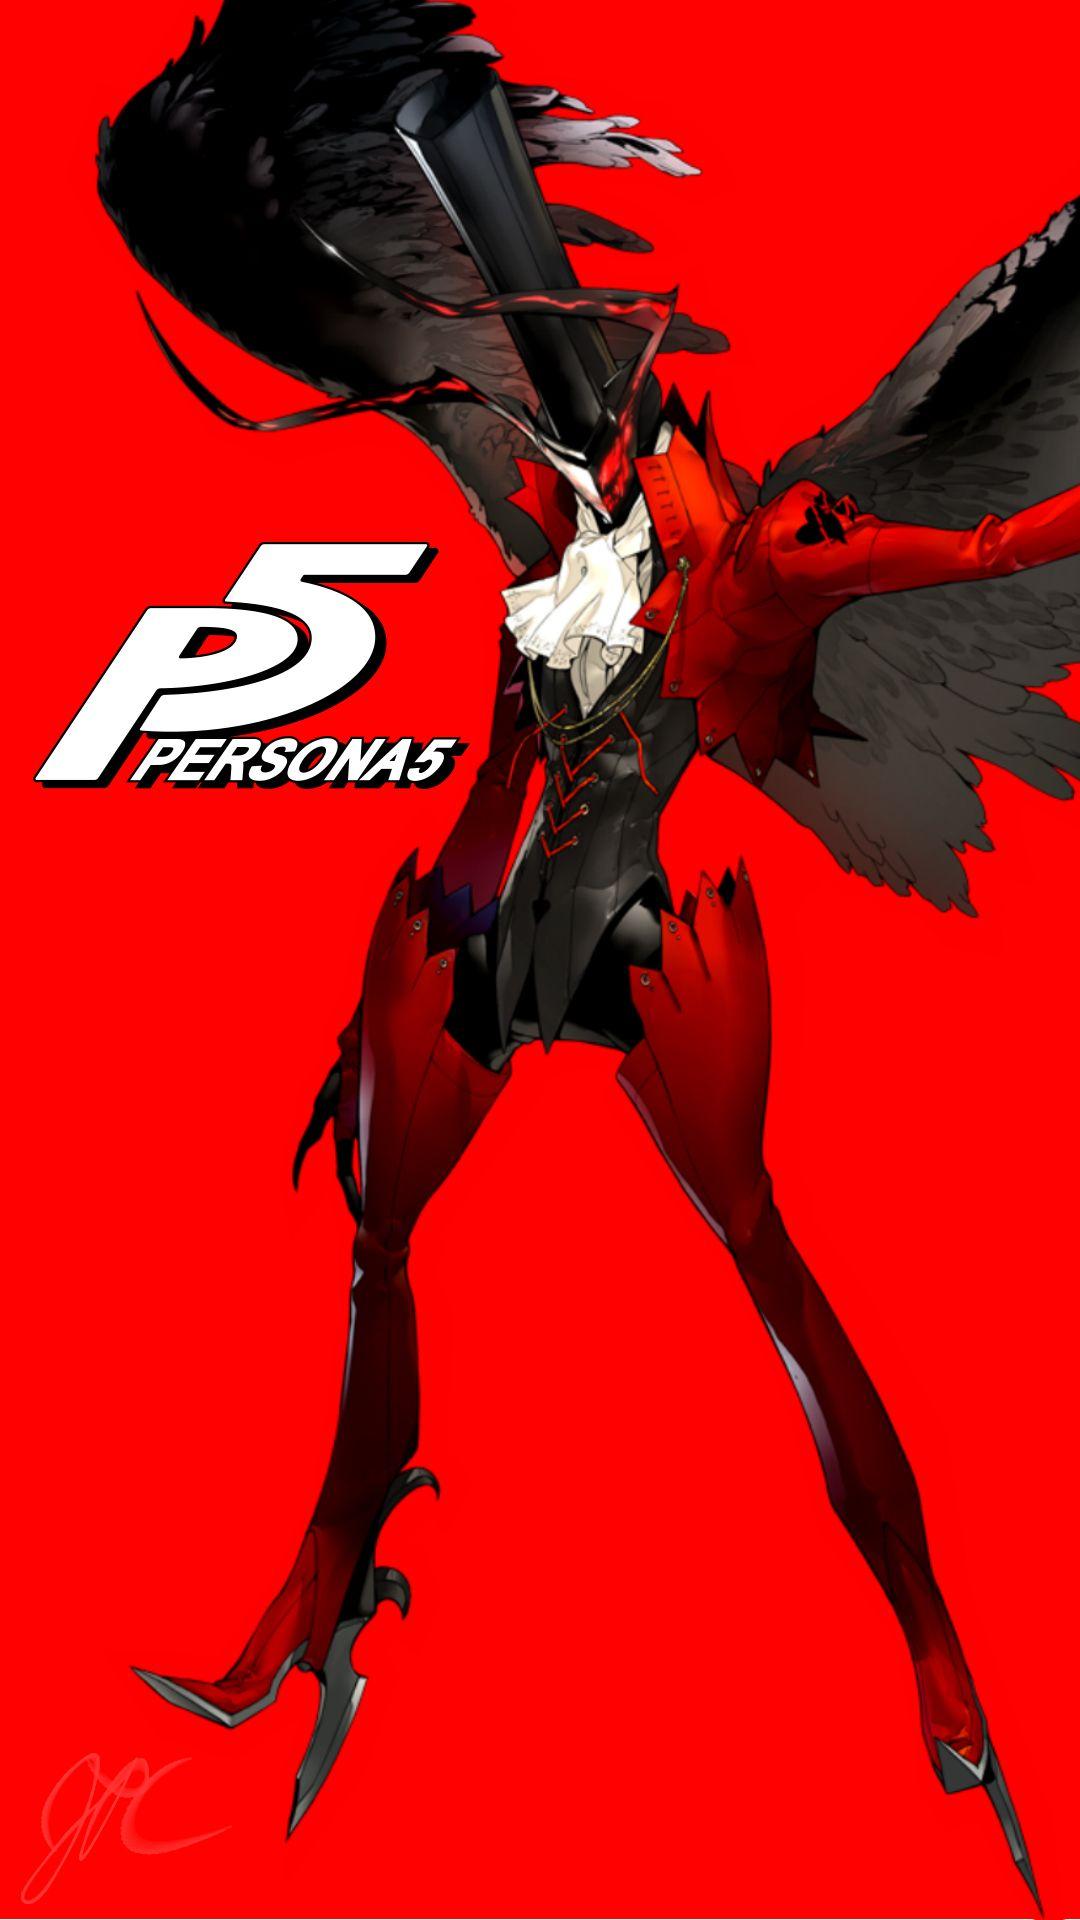 Phone Wallpaper for the Personas of Persona 5